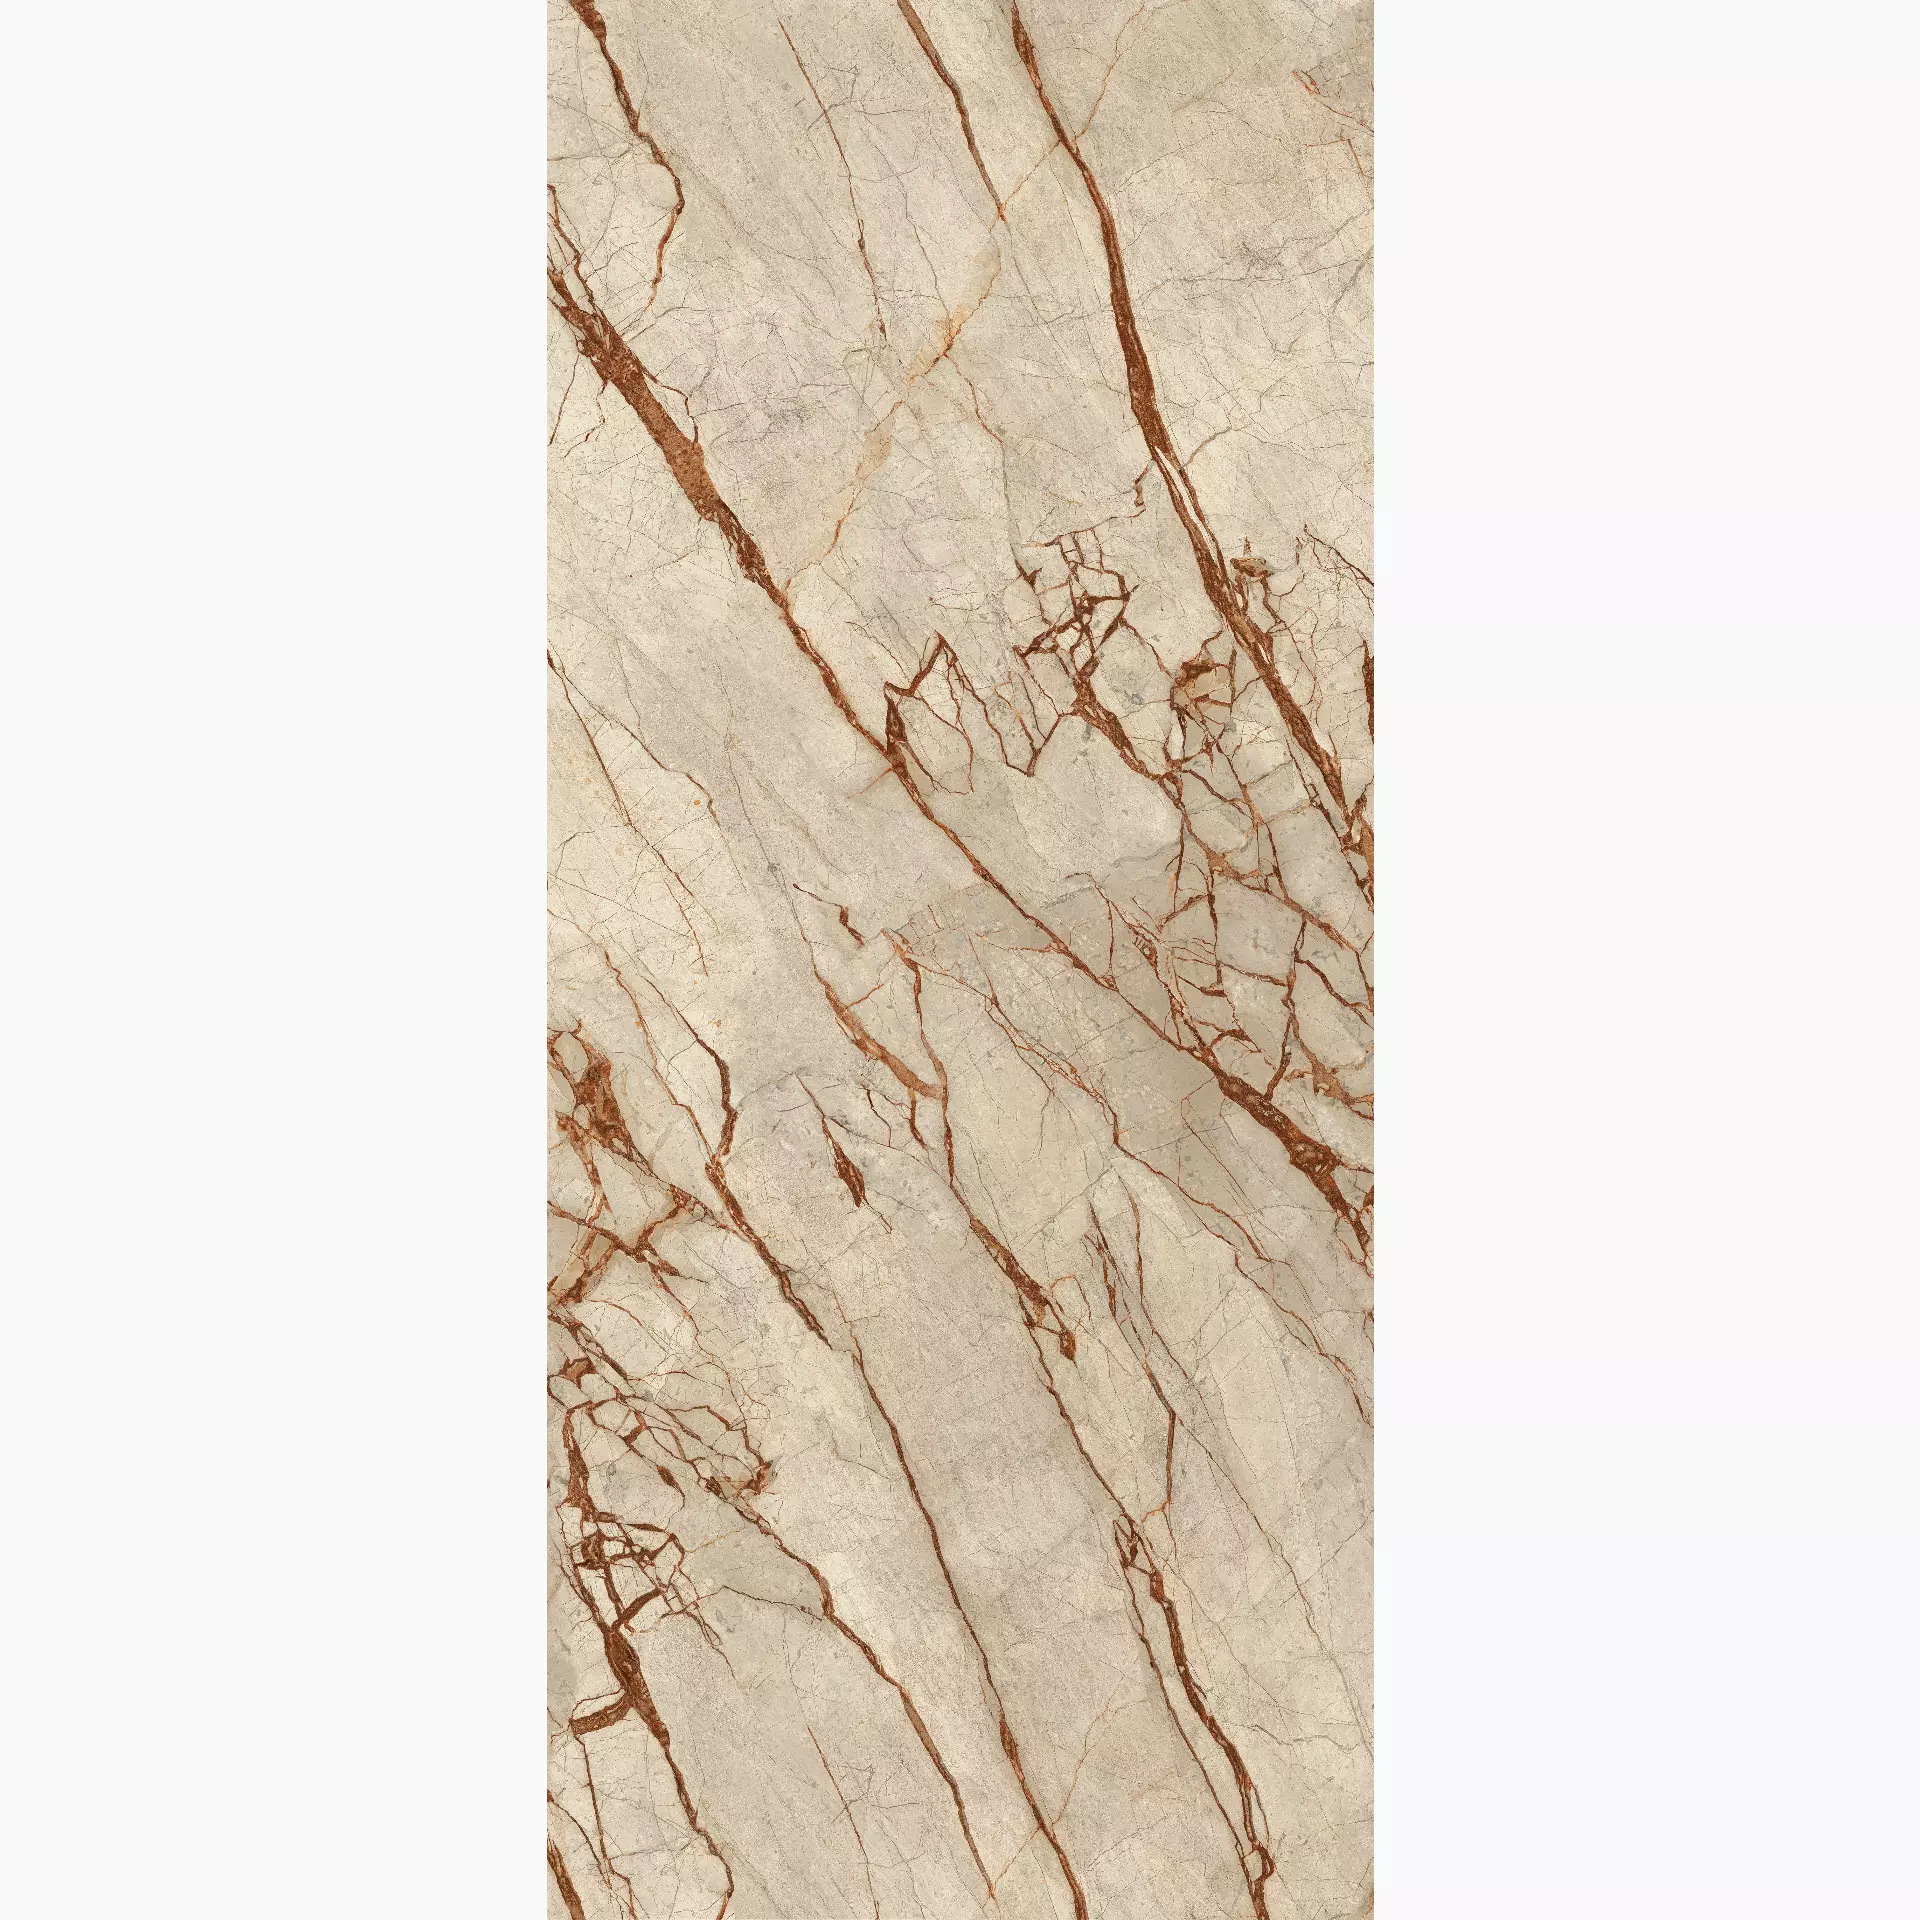 Fondovalle Infinito 2.0 Gold River Glossy INF1882 120x278cm rectified 6,5mm